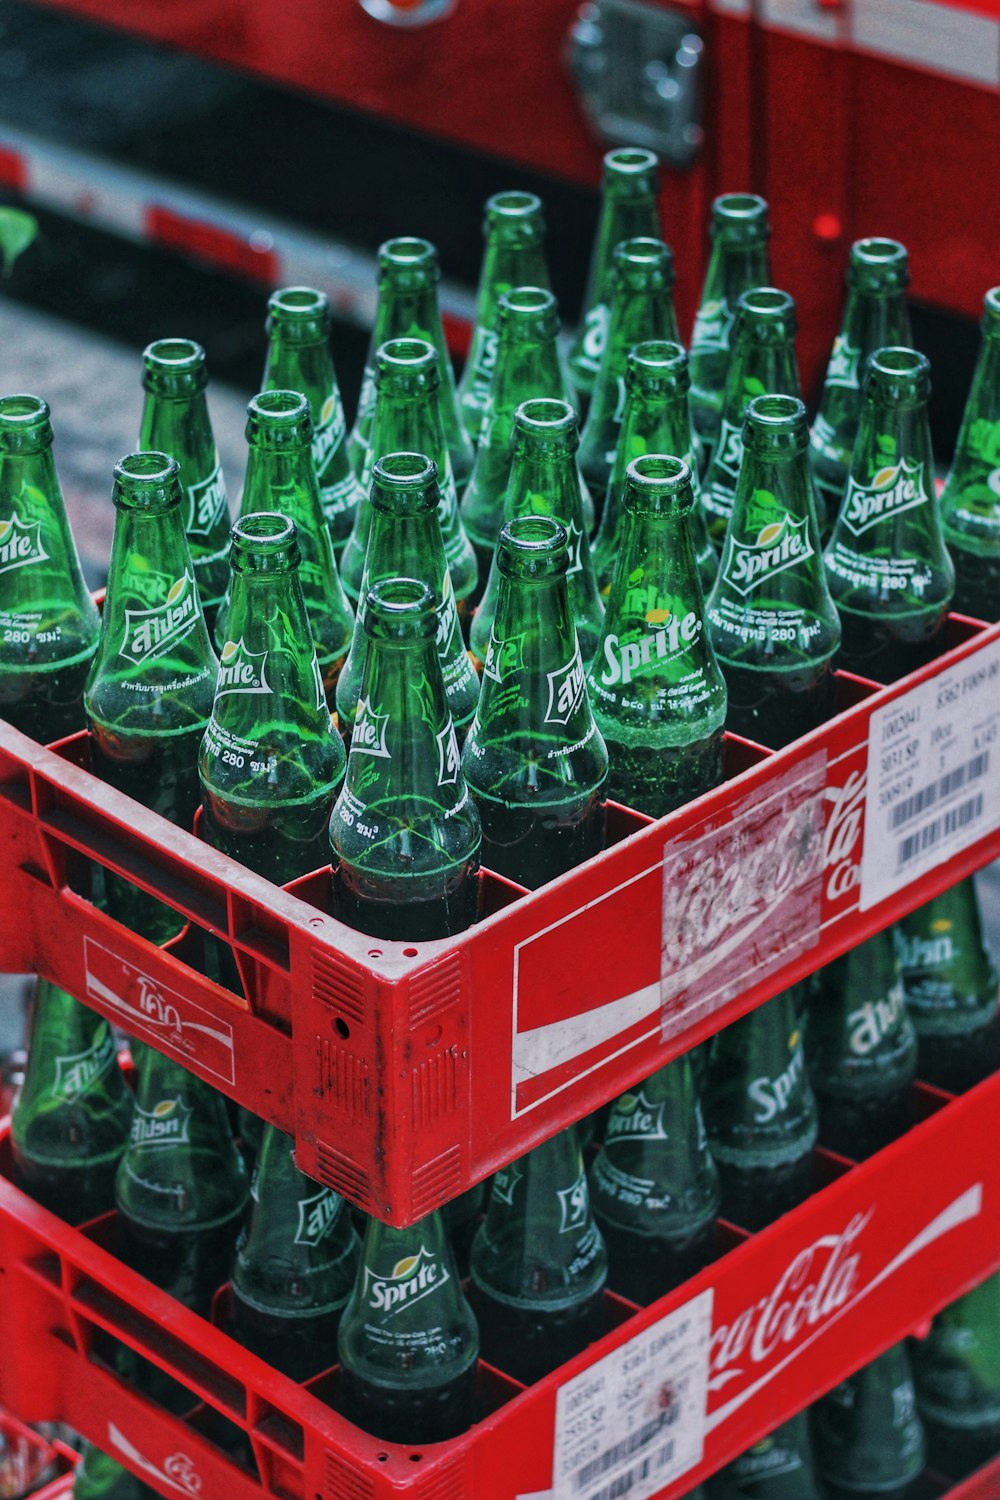 Sprite glass bottles in red crates